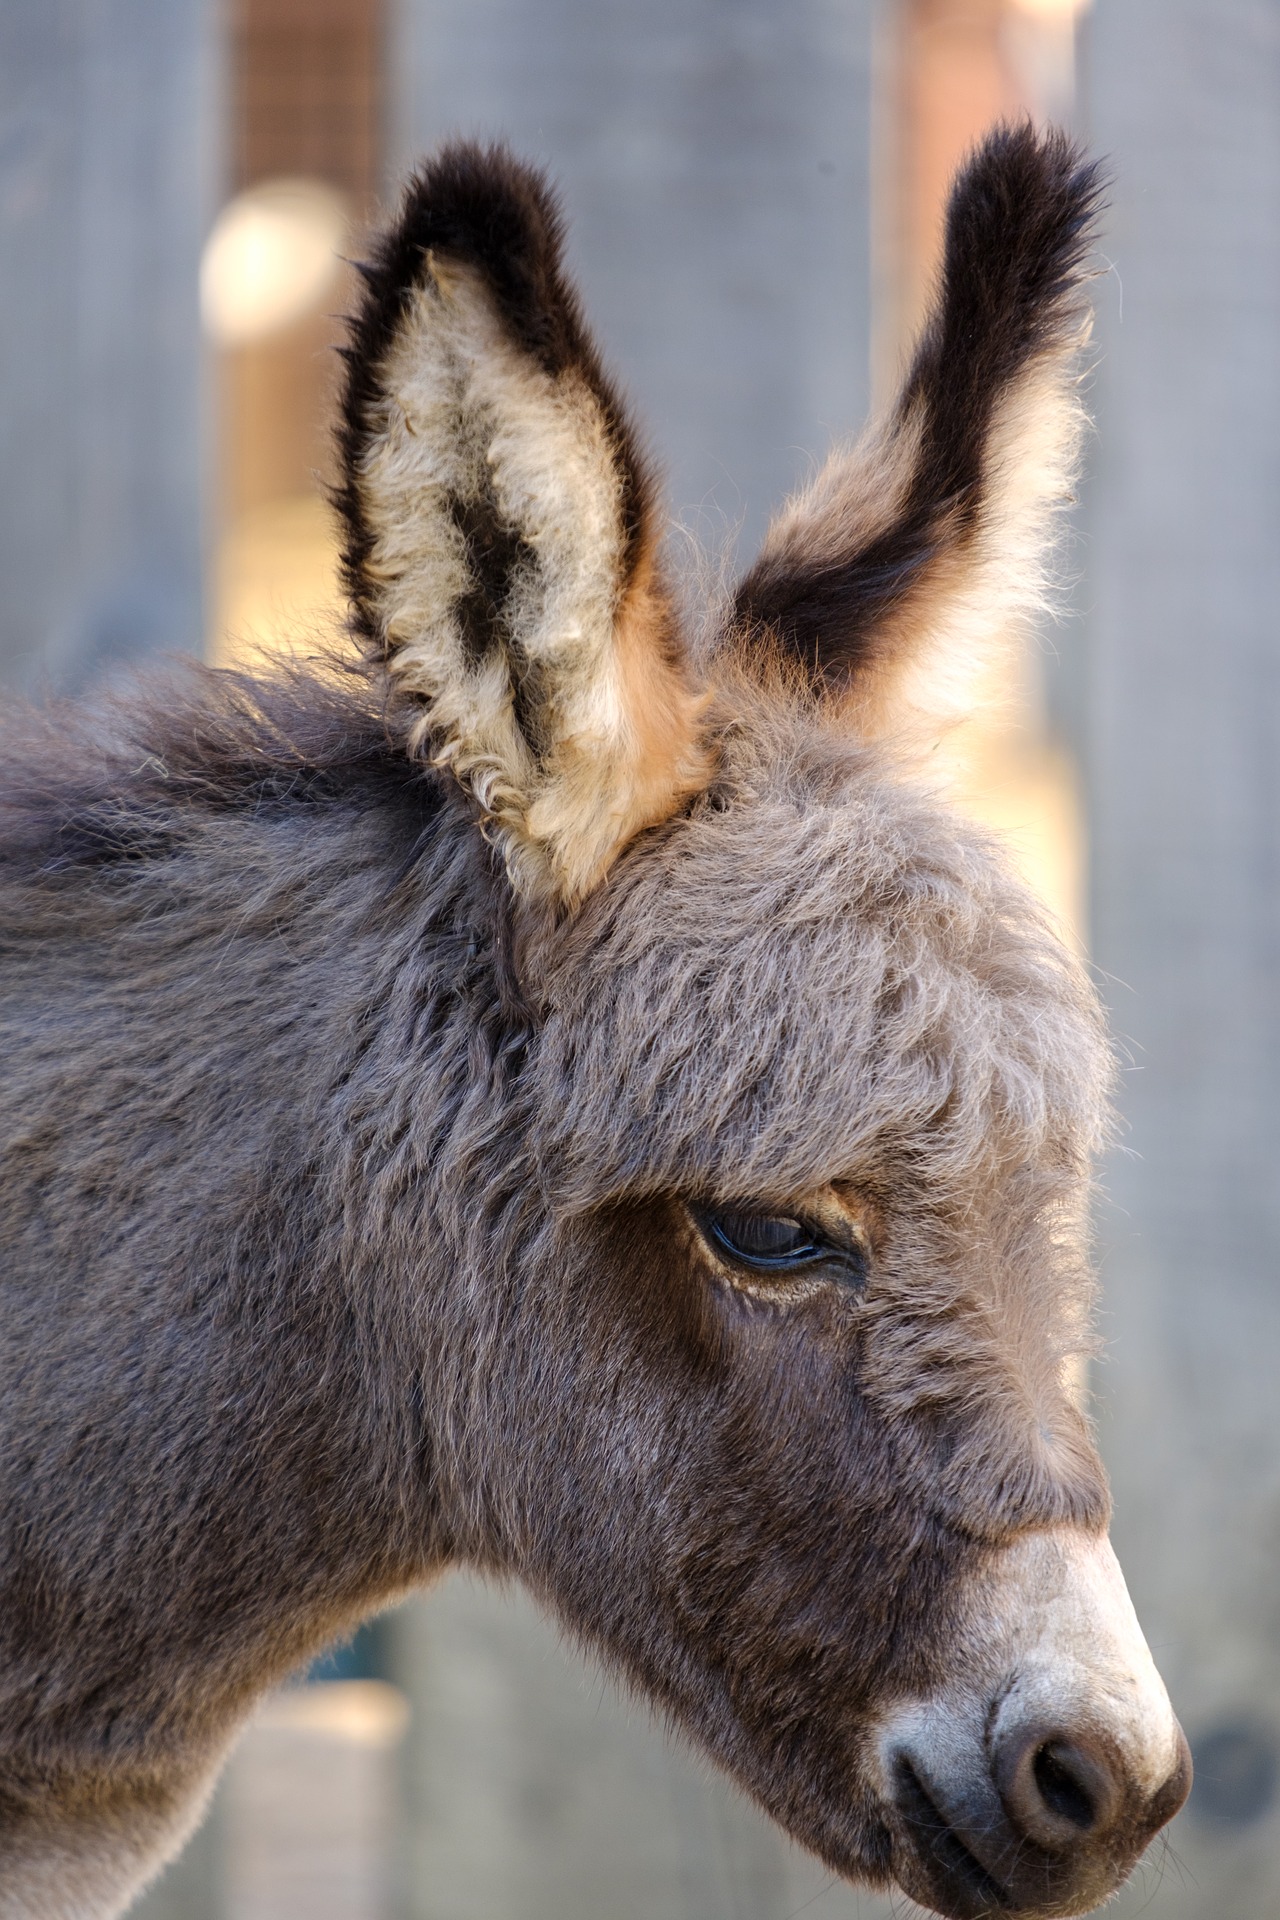 Donkeys are known to mask signs of distress, so their suffering can easily go unnoticed.